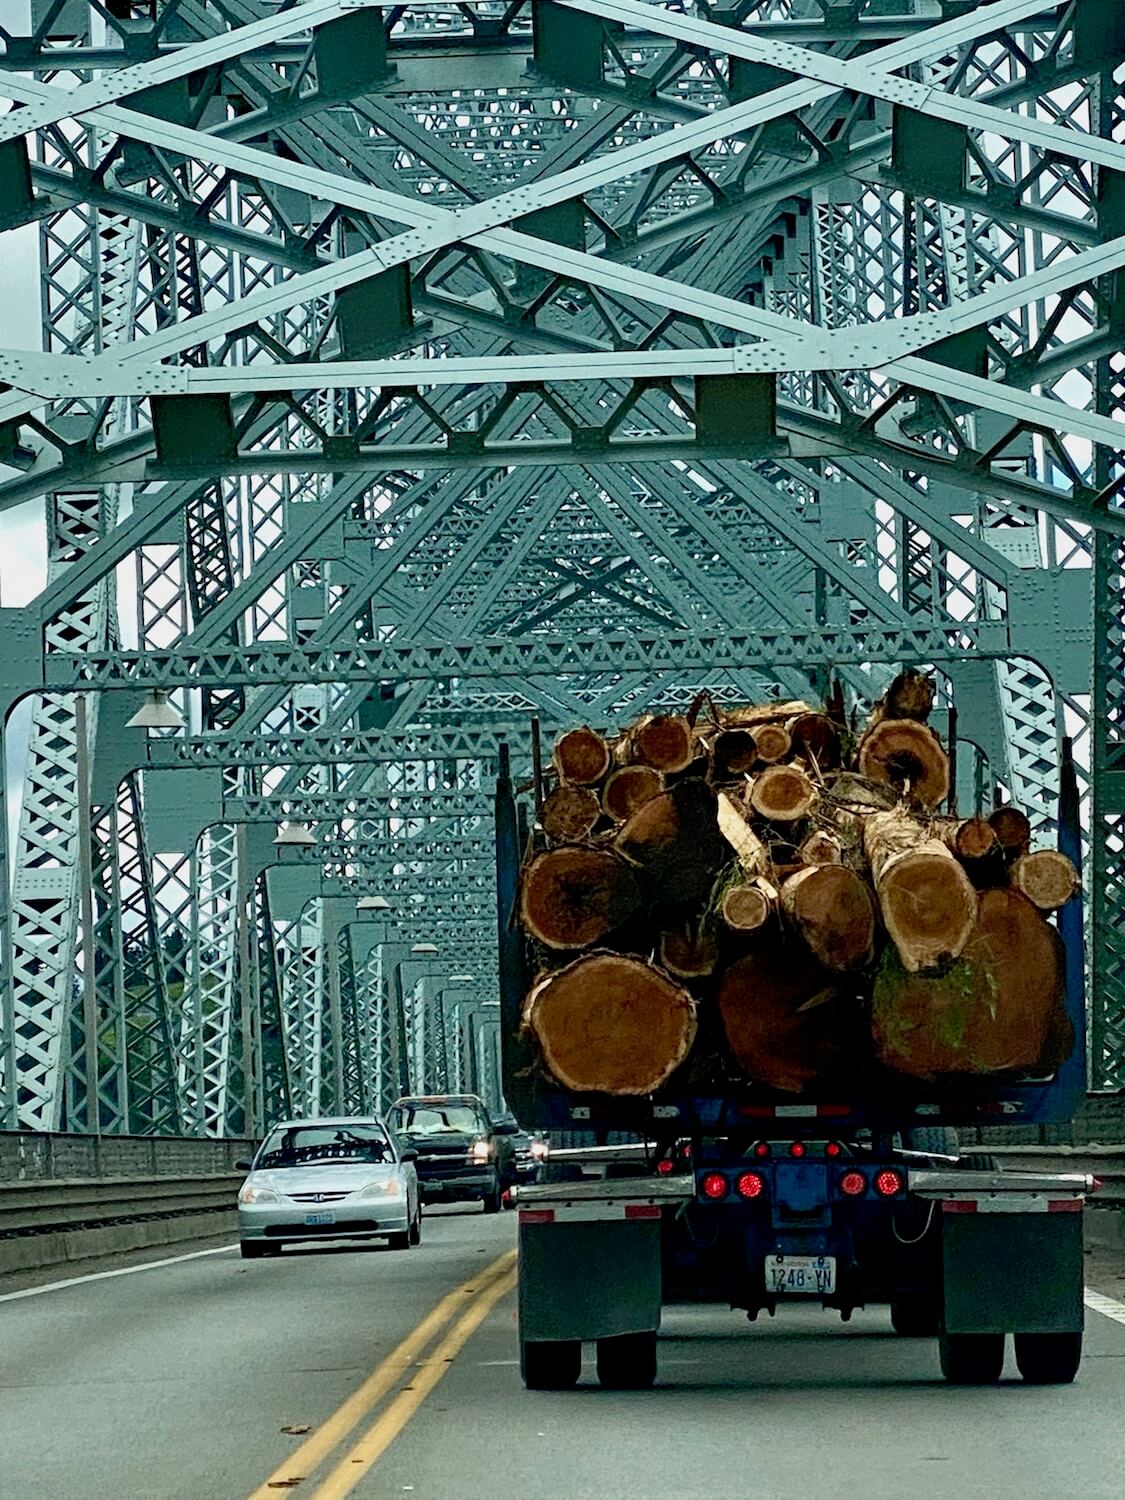 A logging truck full with wood heads up a bridge on the drive to Portland from Seattle on a bridge with aqua green erector beams supporting the entire structure. A car passes on the other side of the ride, which is divided by two solid yellow lines.